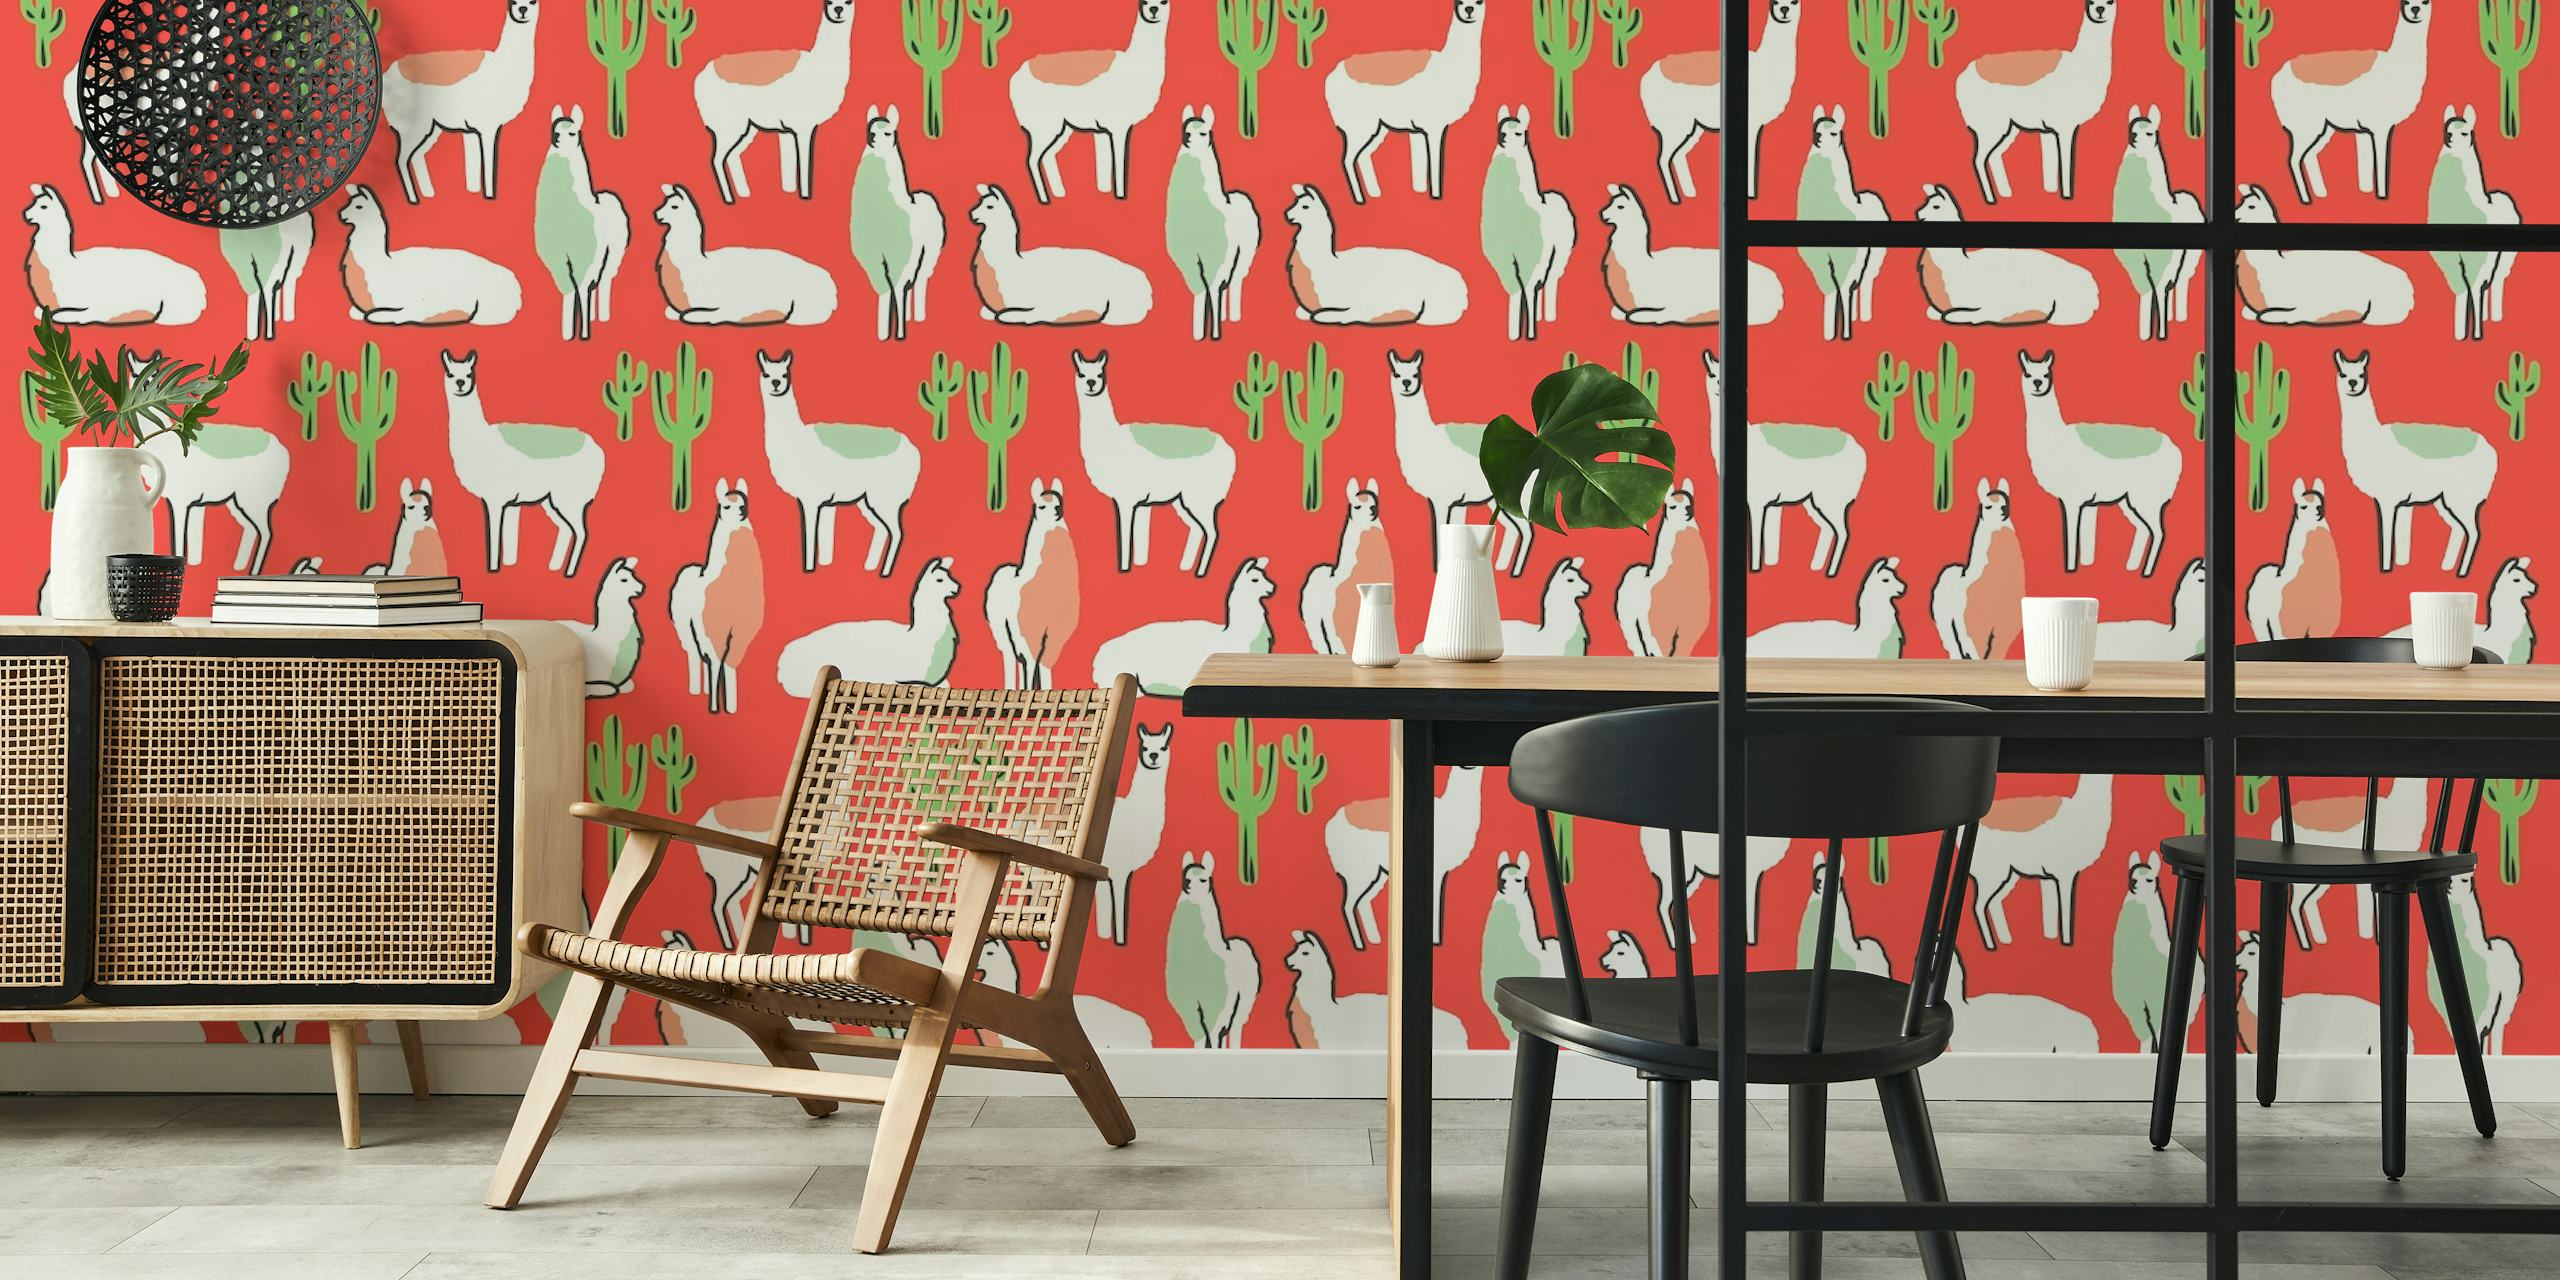 Llamas and cacti patterned wall mural on a red background